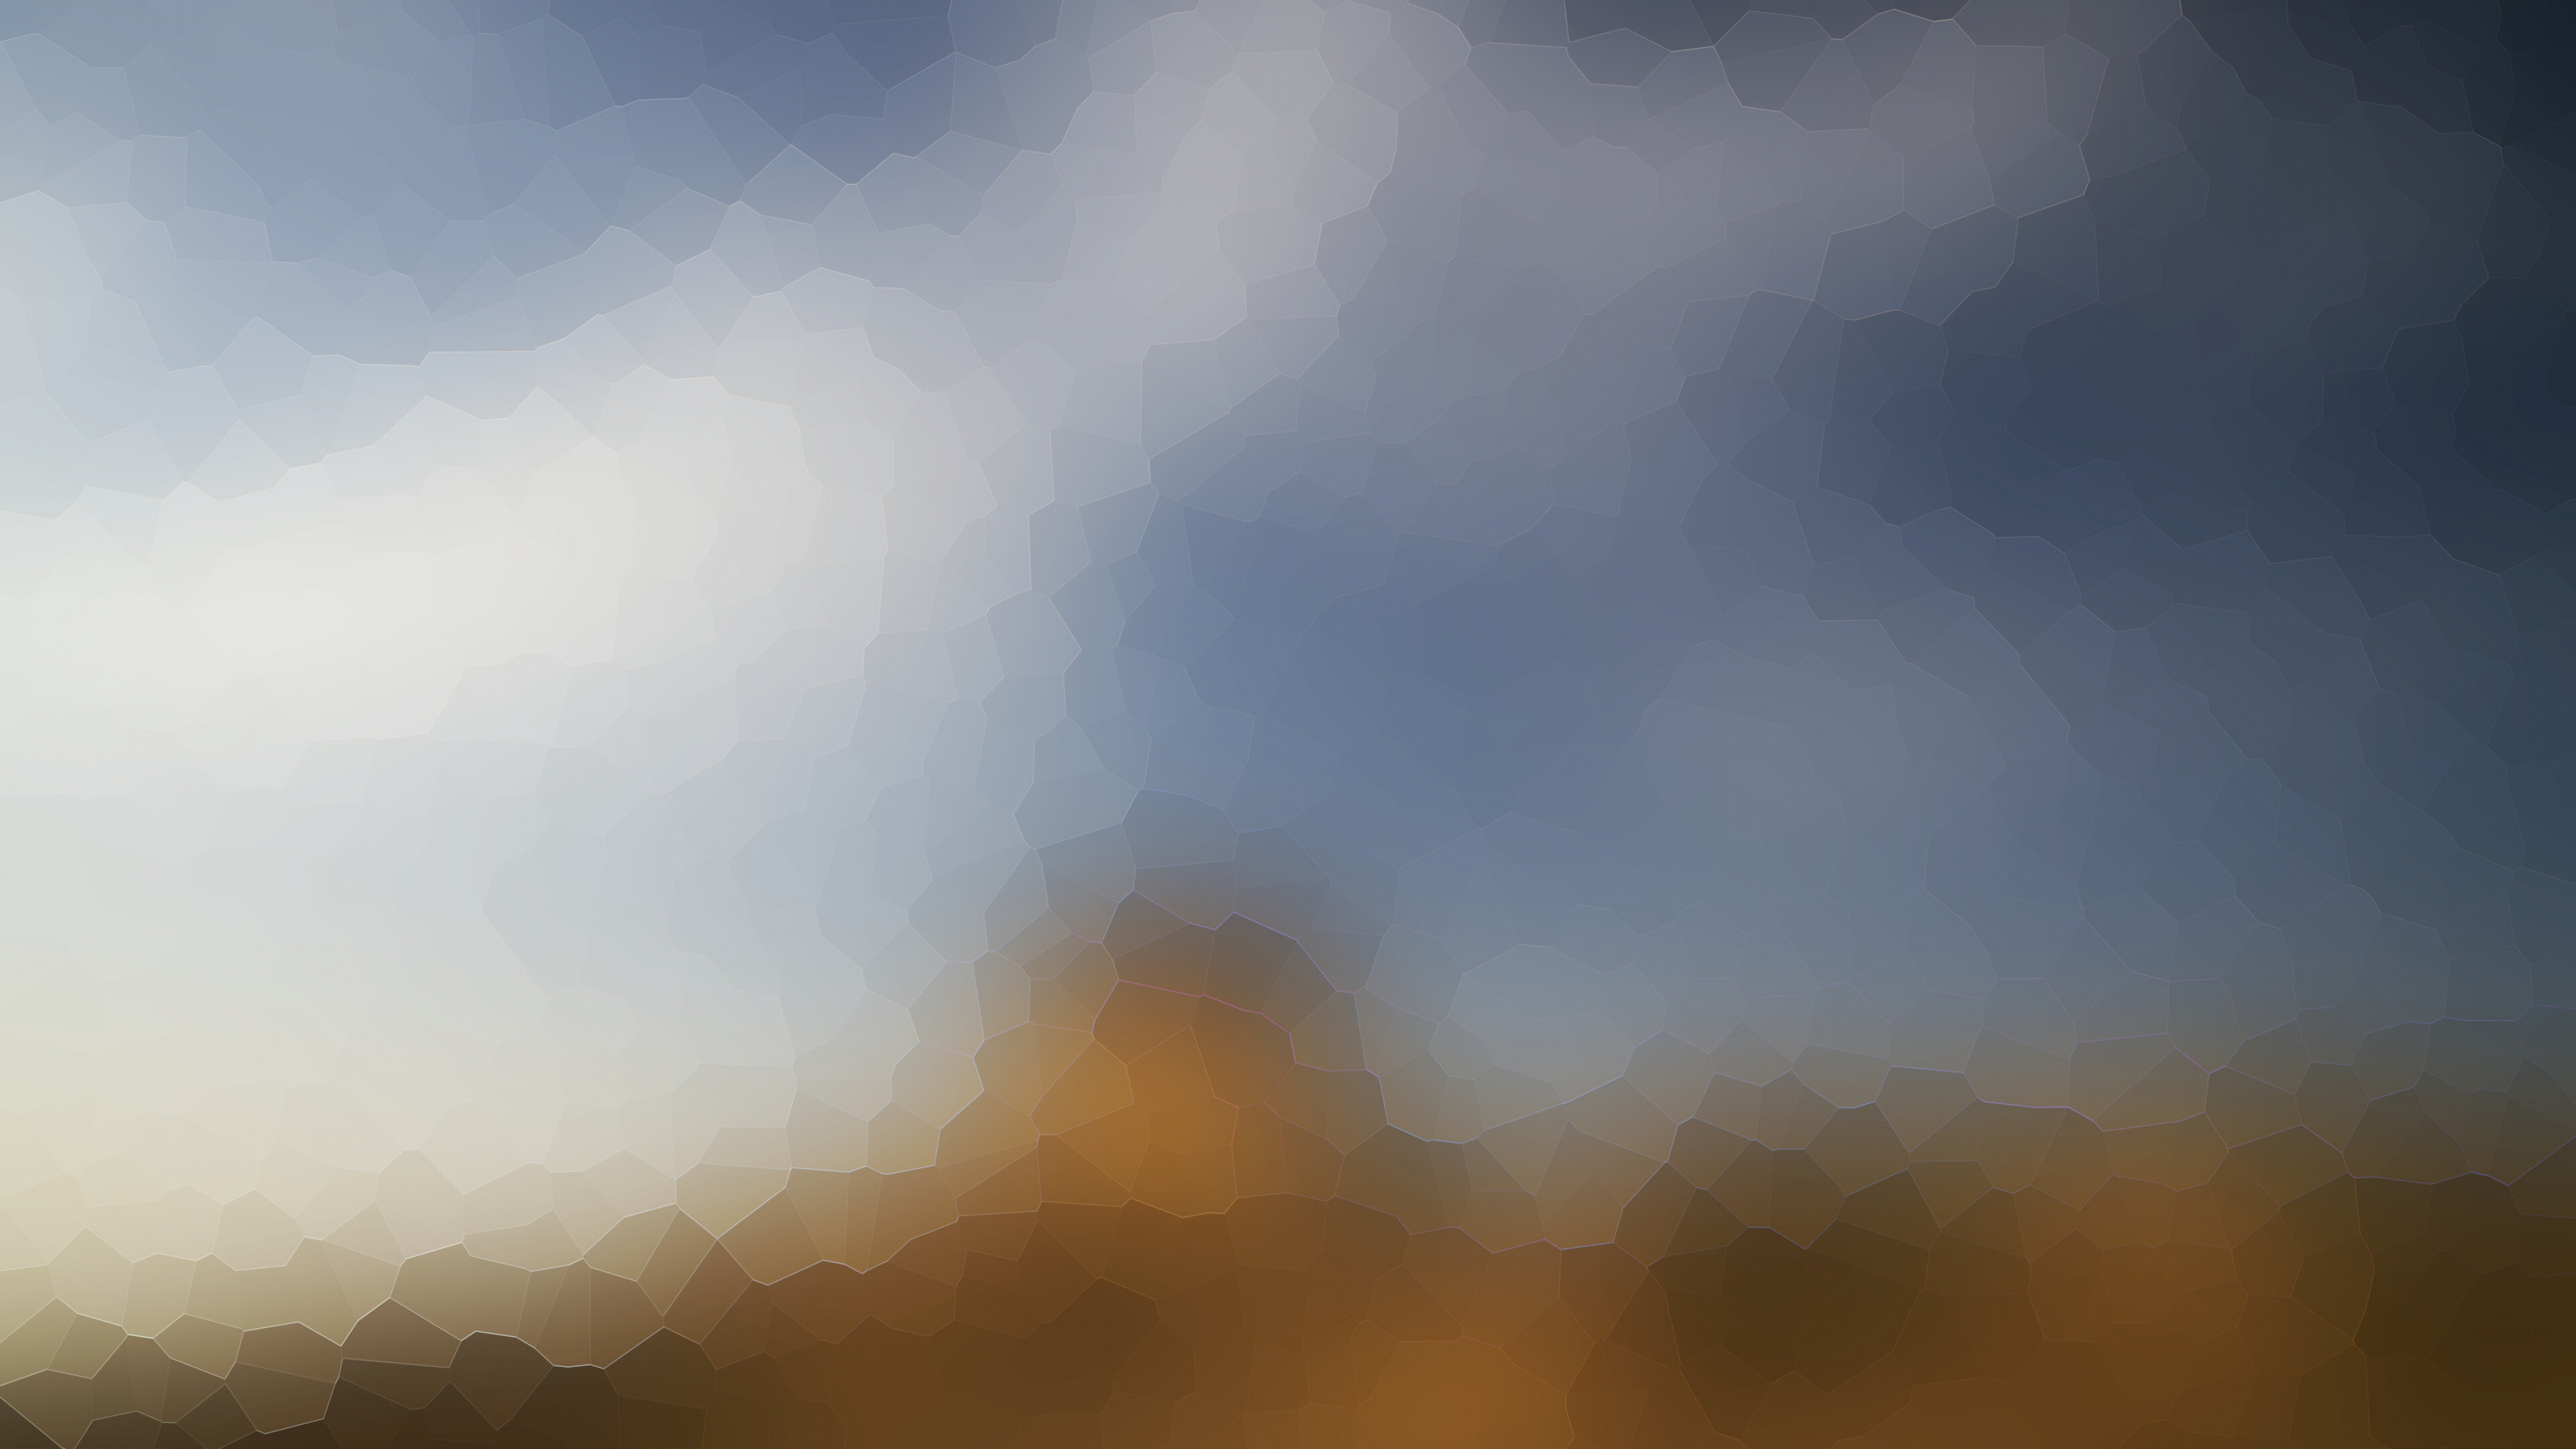 Geometric Abstract: Blur, Hexagons, Heptagons, Octagons, Complementary angles. 3840x2160 4K Wallpaper.